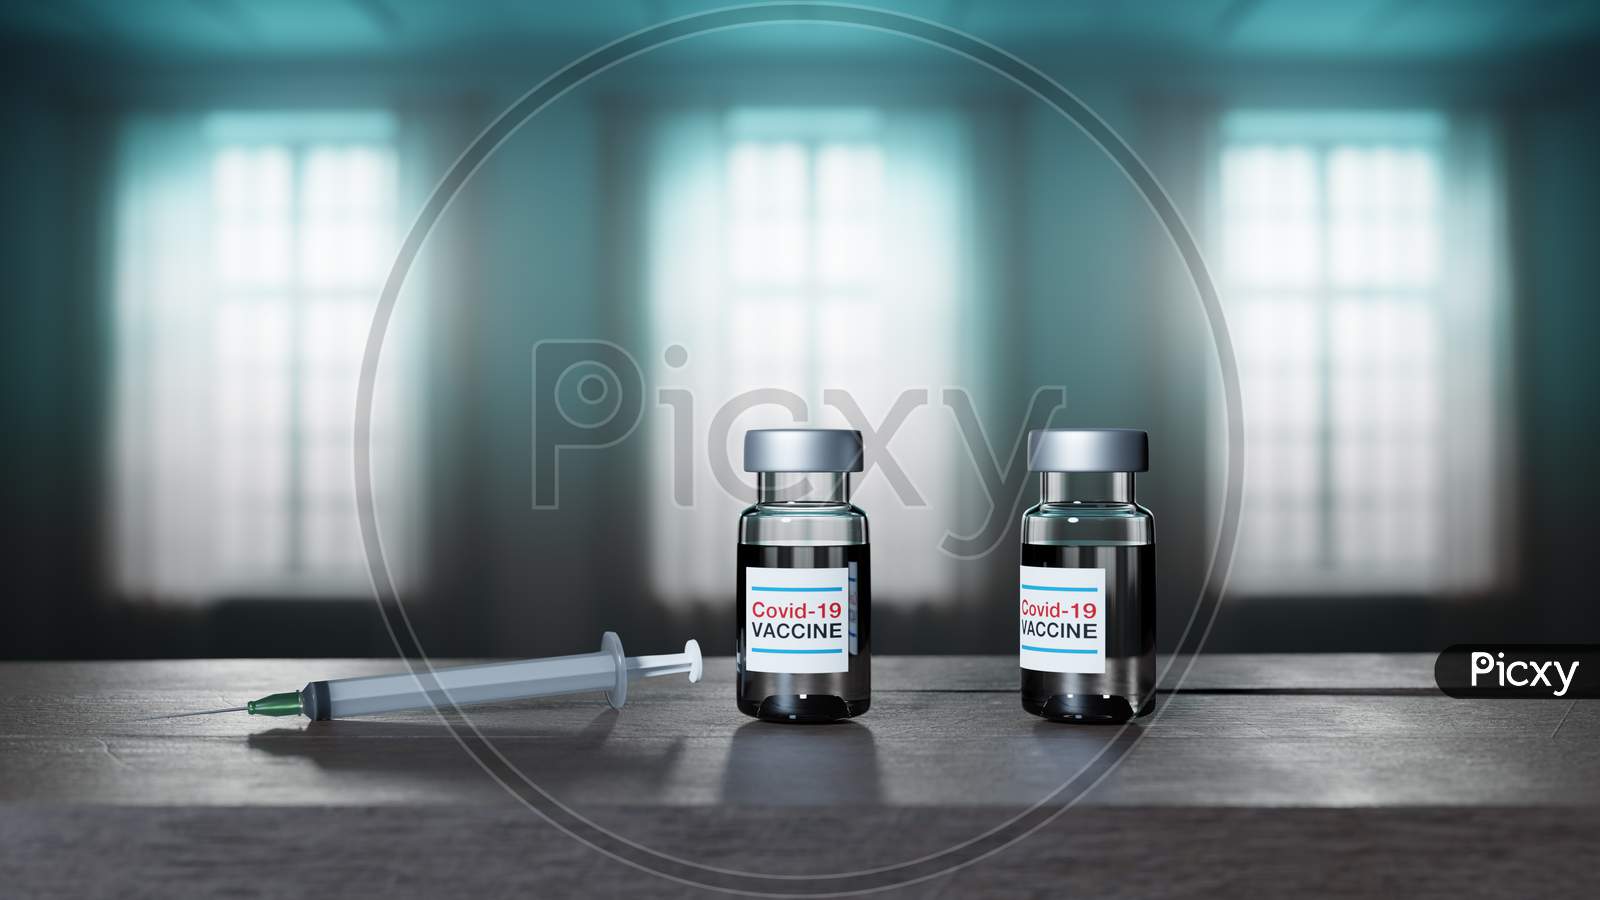 3D Render Of Glass Covid-19 Vaccine Vials And A Plastic Syringe Placed On A Wooden Table Against Windows